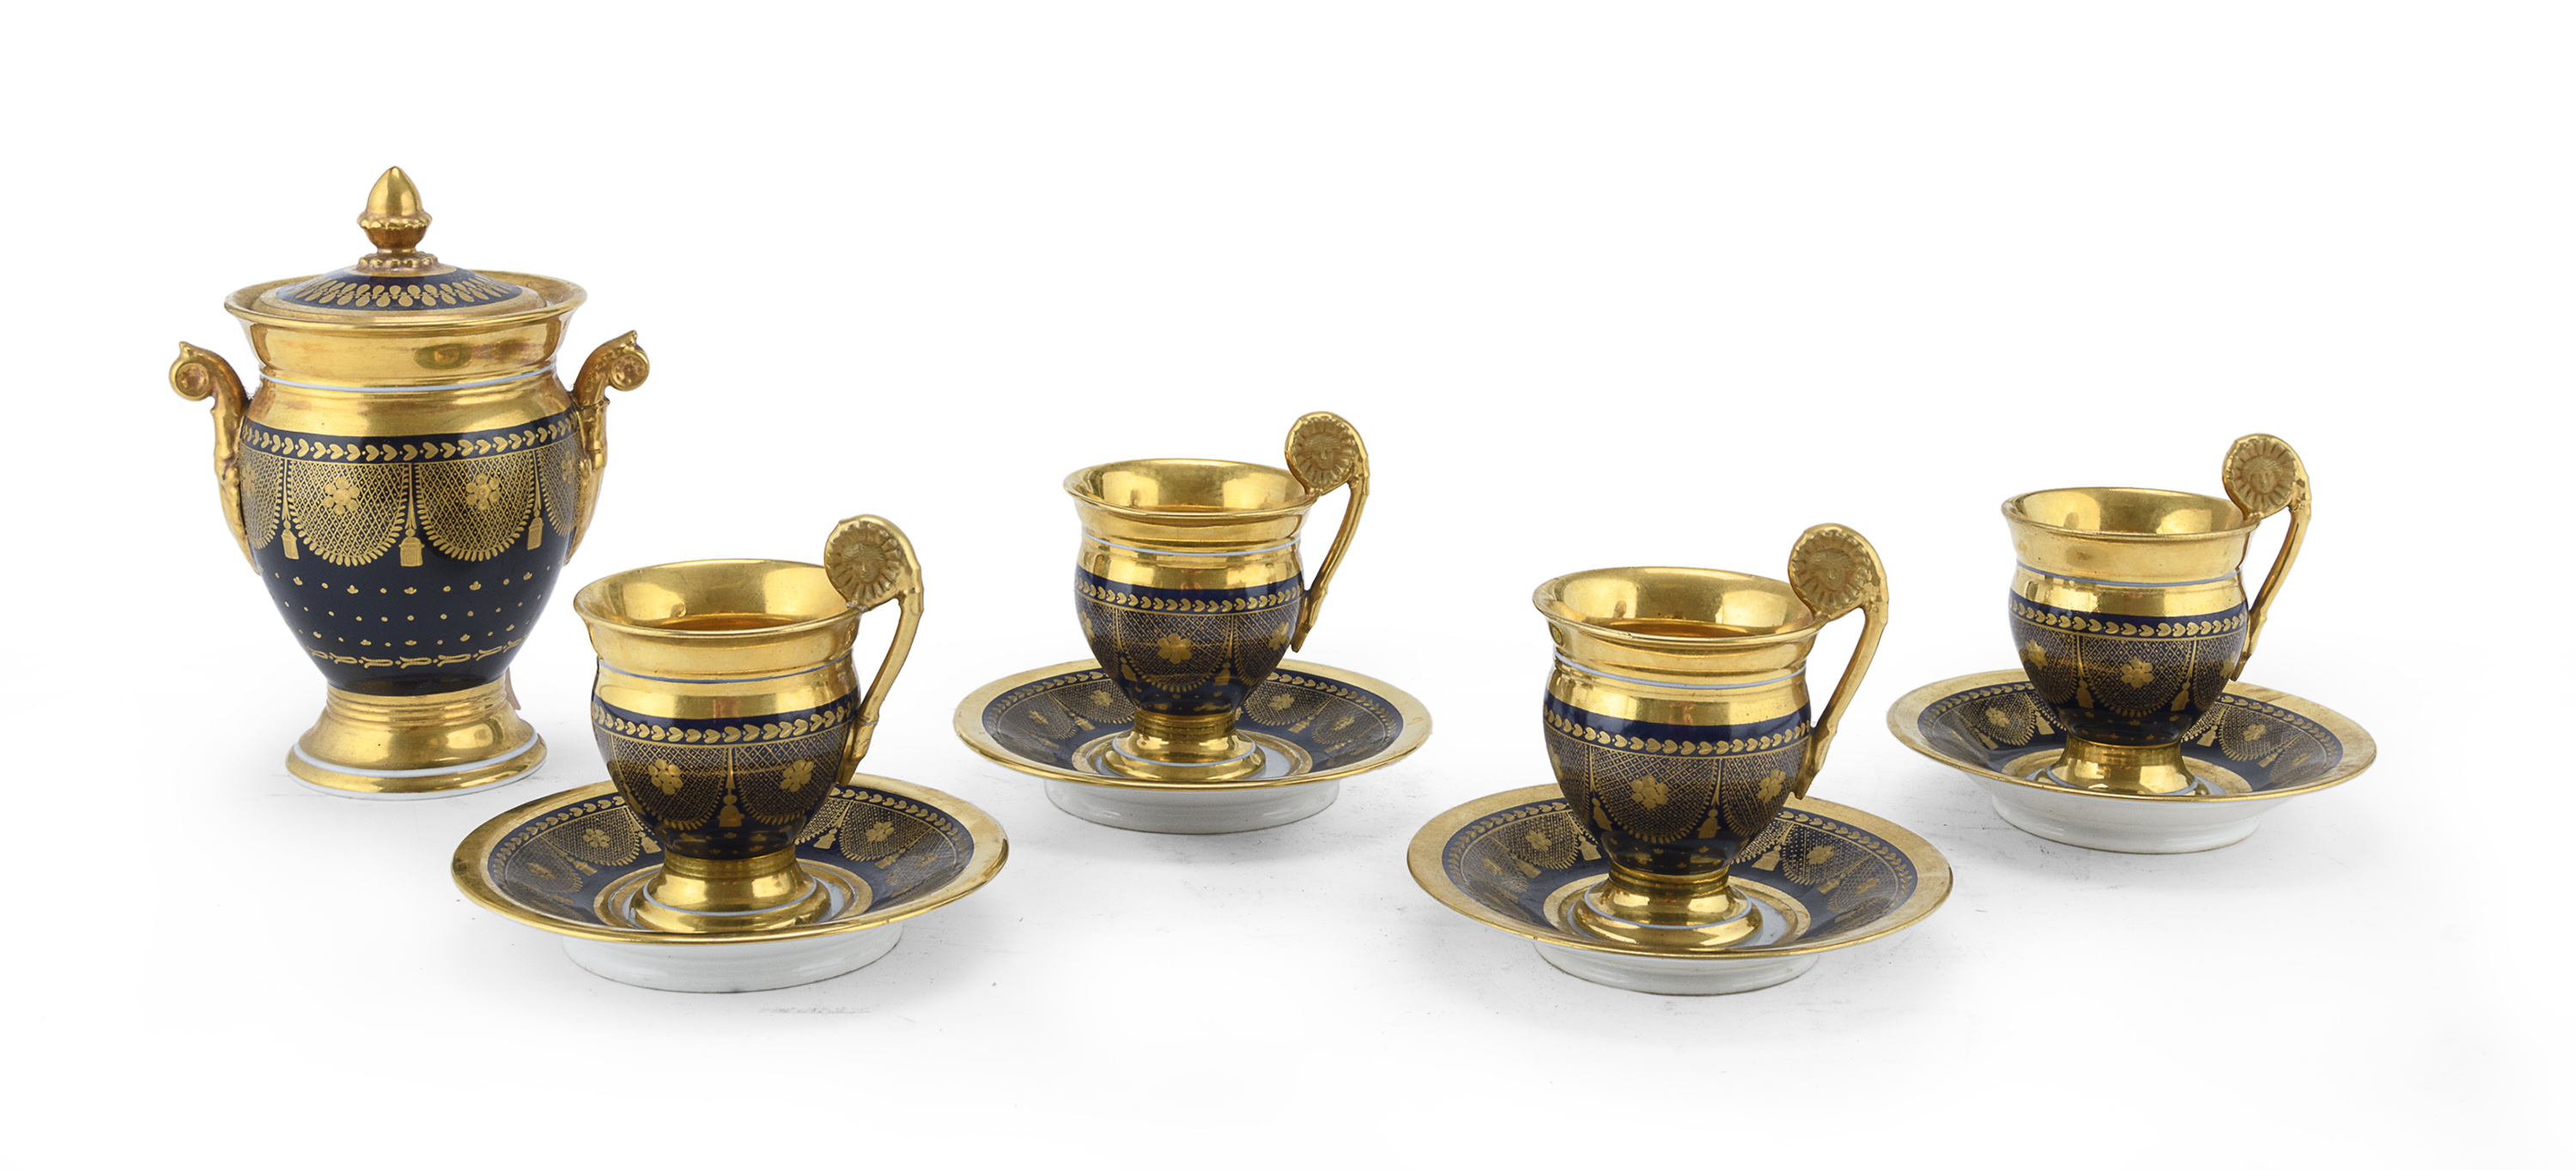 SET OF PORCELAIN CUPS AND SUGAR BOWL FRANCE 19th CENTURY